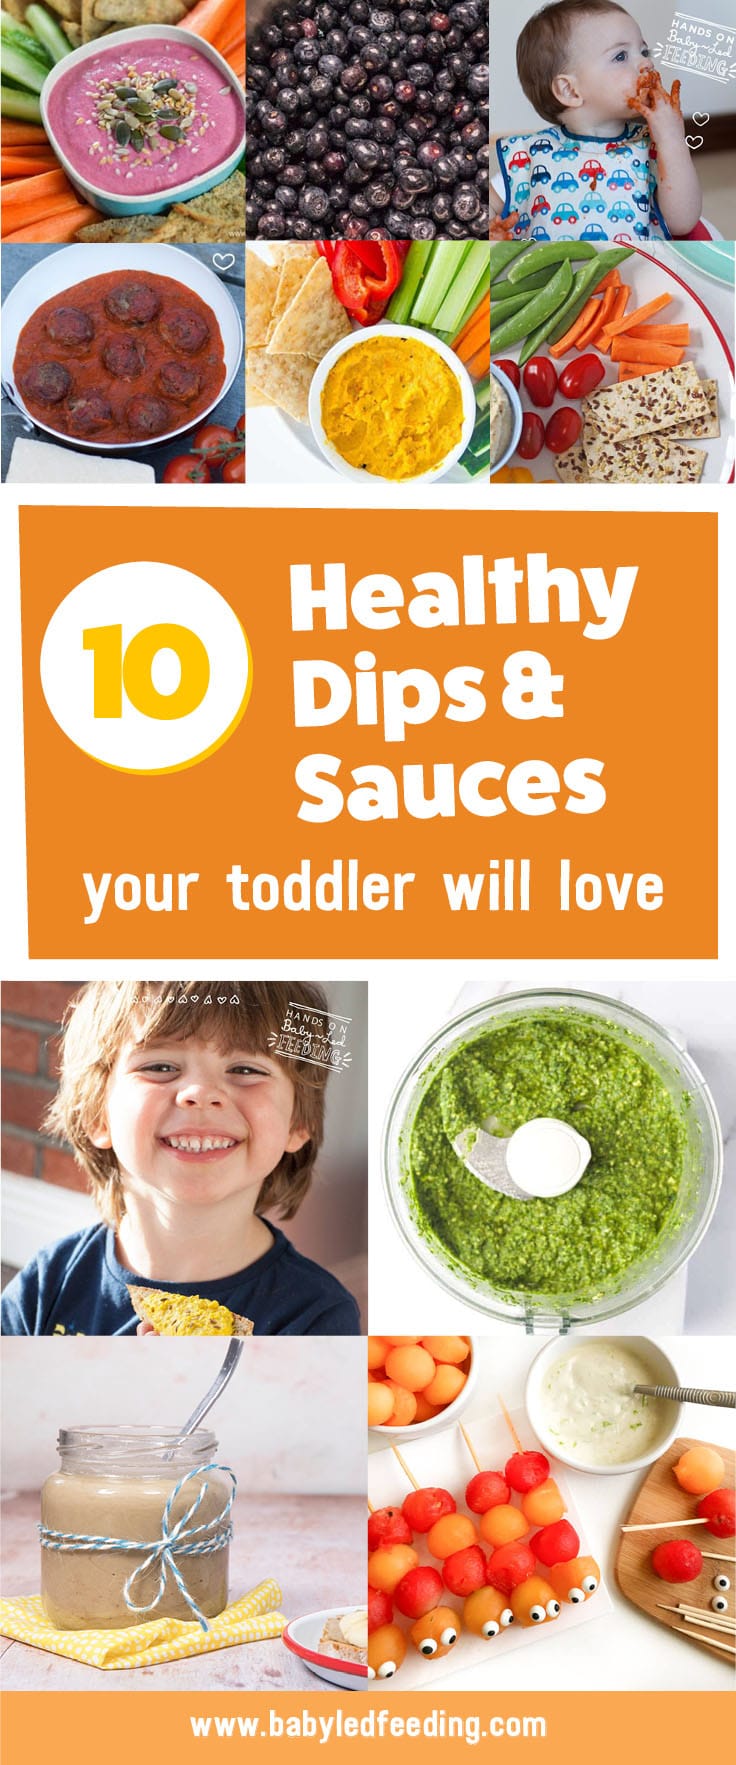 10 Easy Healthy Dip and Sauce Recipes that are Baby Led Weaning Friendly. Fruit dips, veggie dips, pita dips, and jams!  Family friendly recipe that are great for picky eaters and accompany finger foods perfectly! #diprecipe #saucerecipe #veggies #pickyeater #babyledweaning 